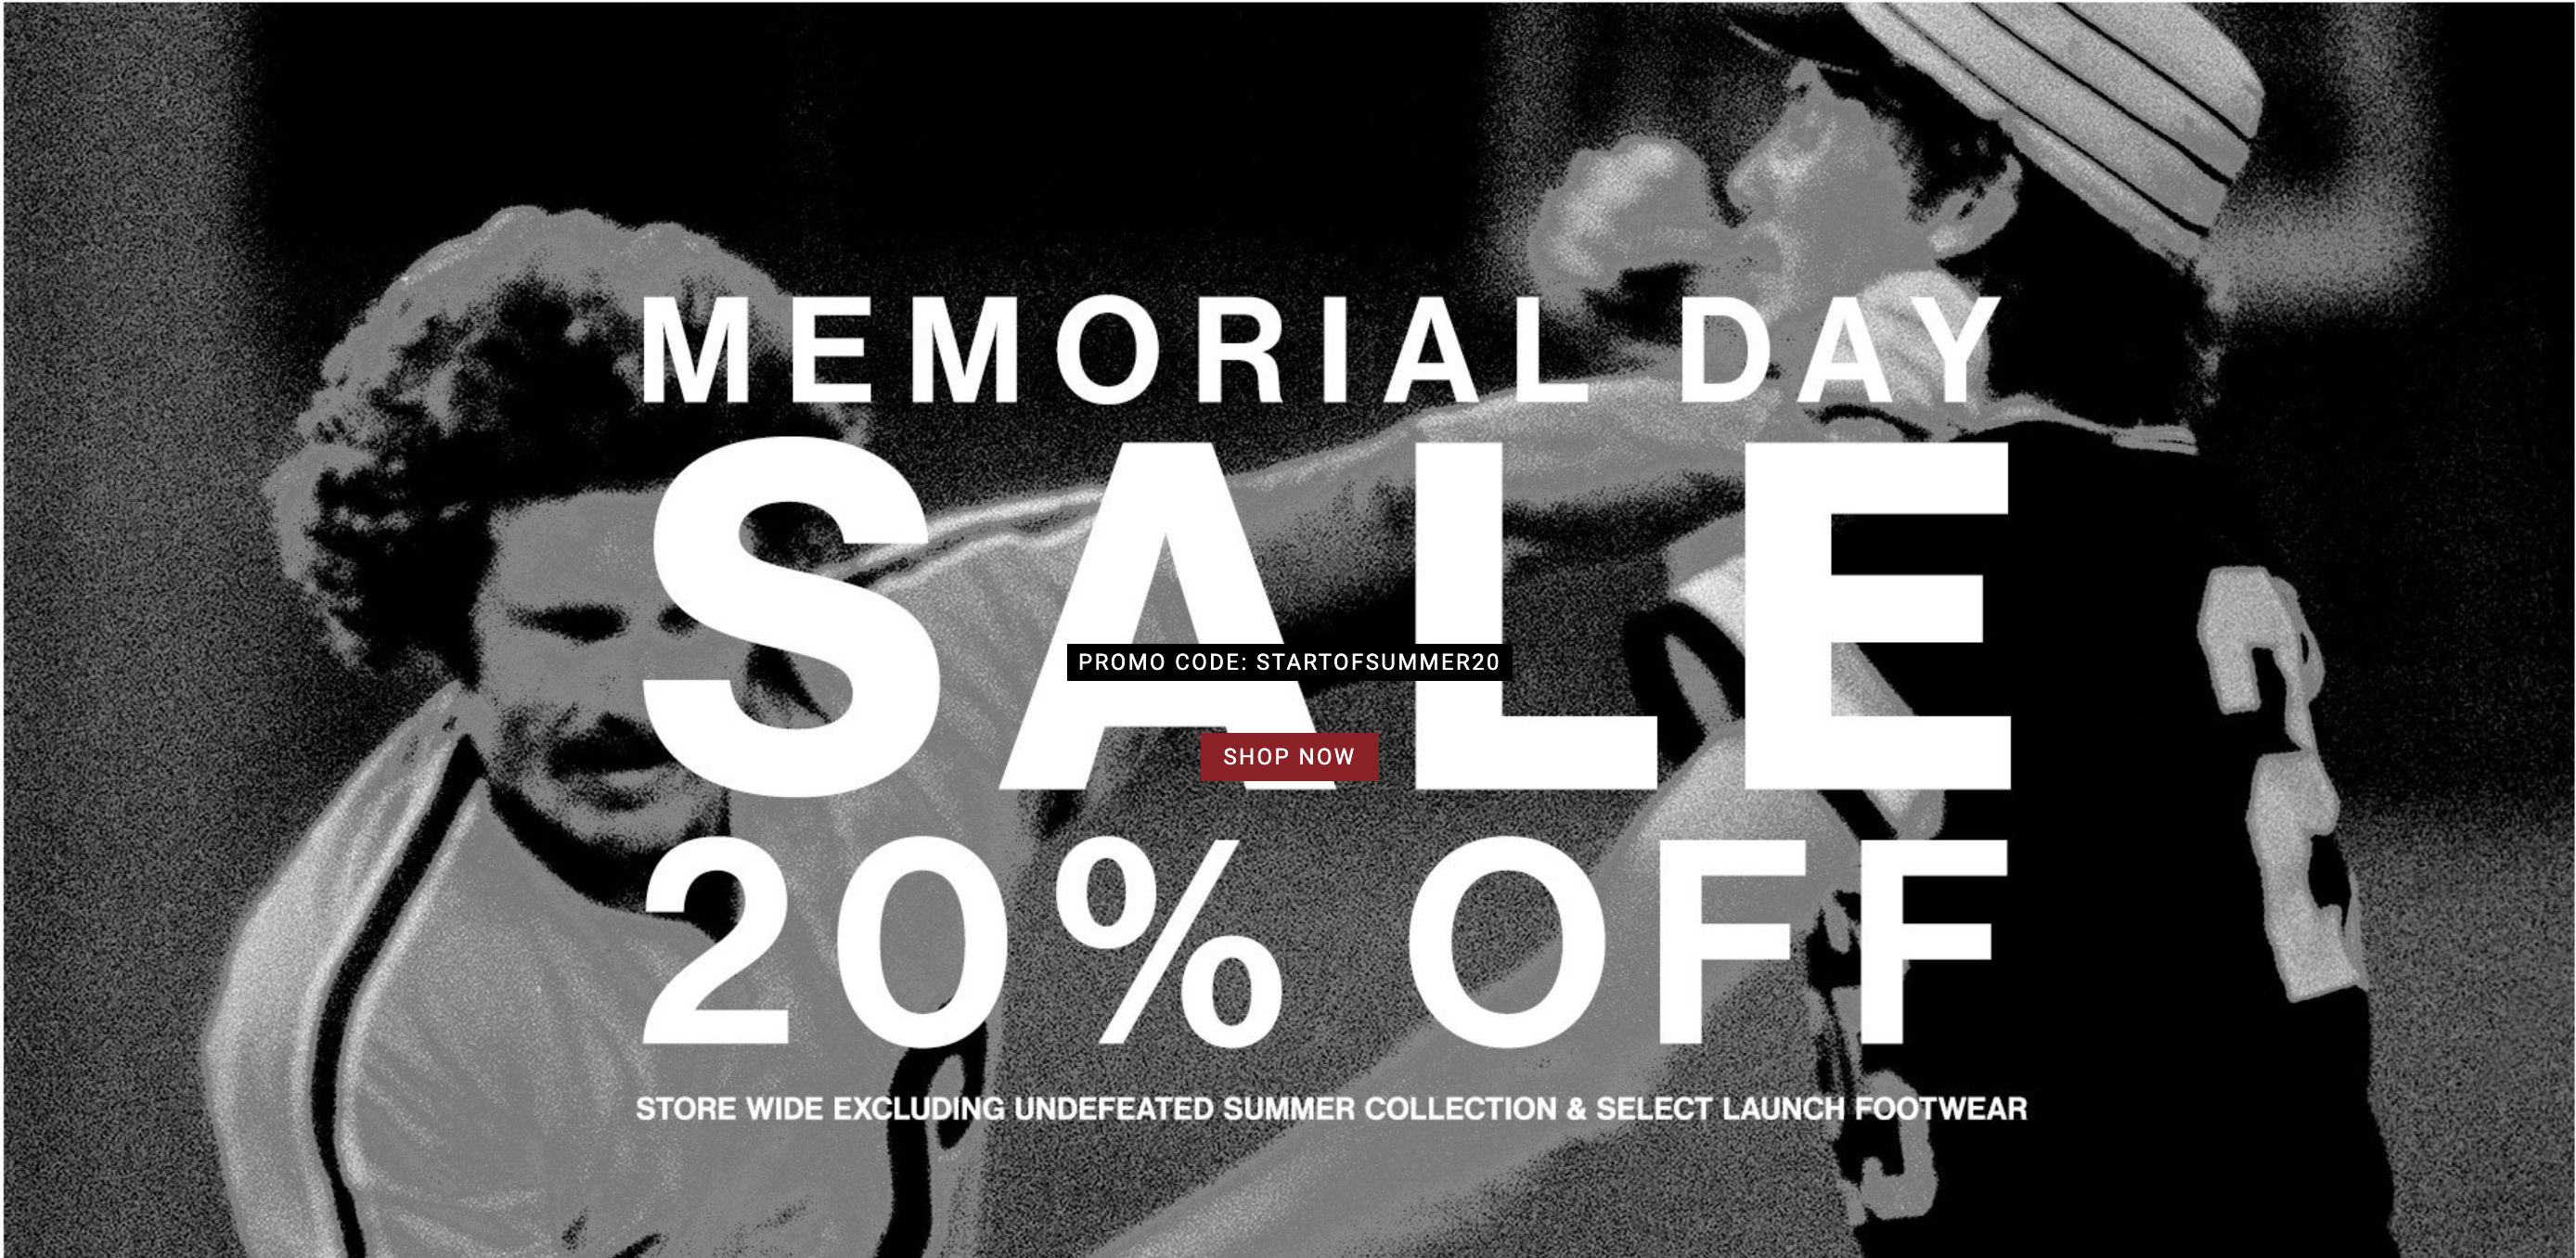 undefeated memorial day sale 2019 banner